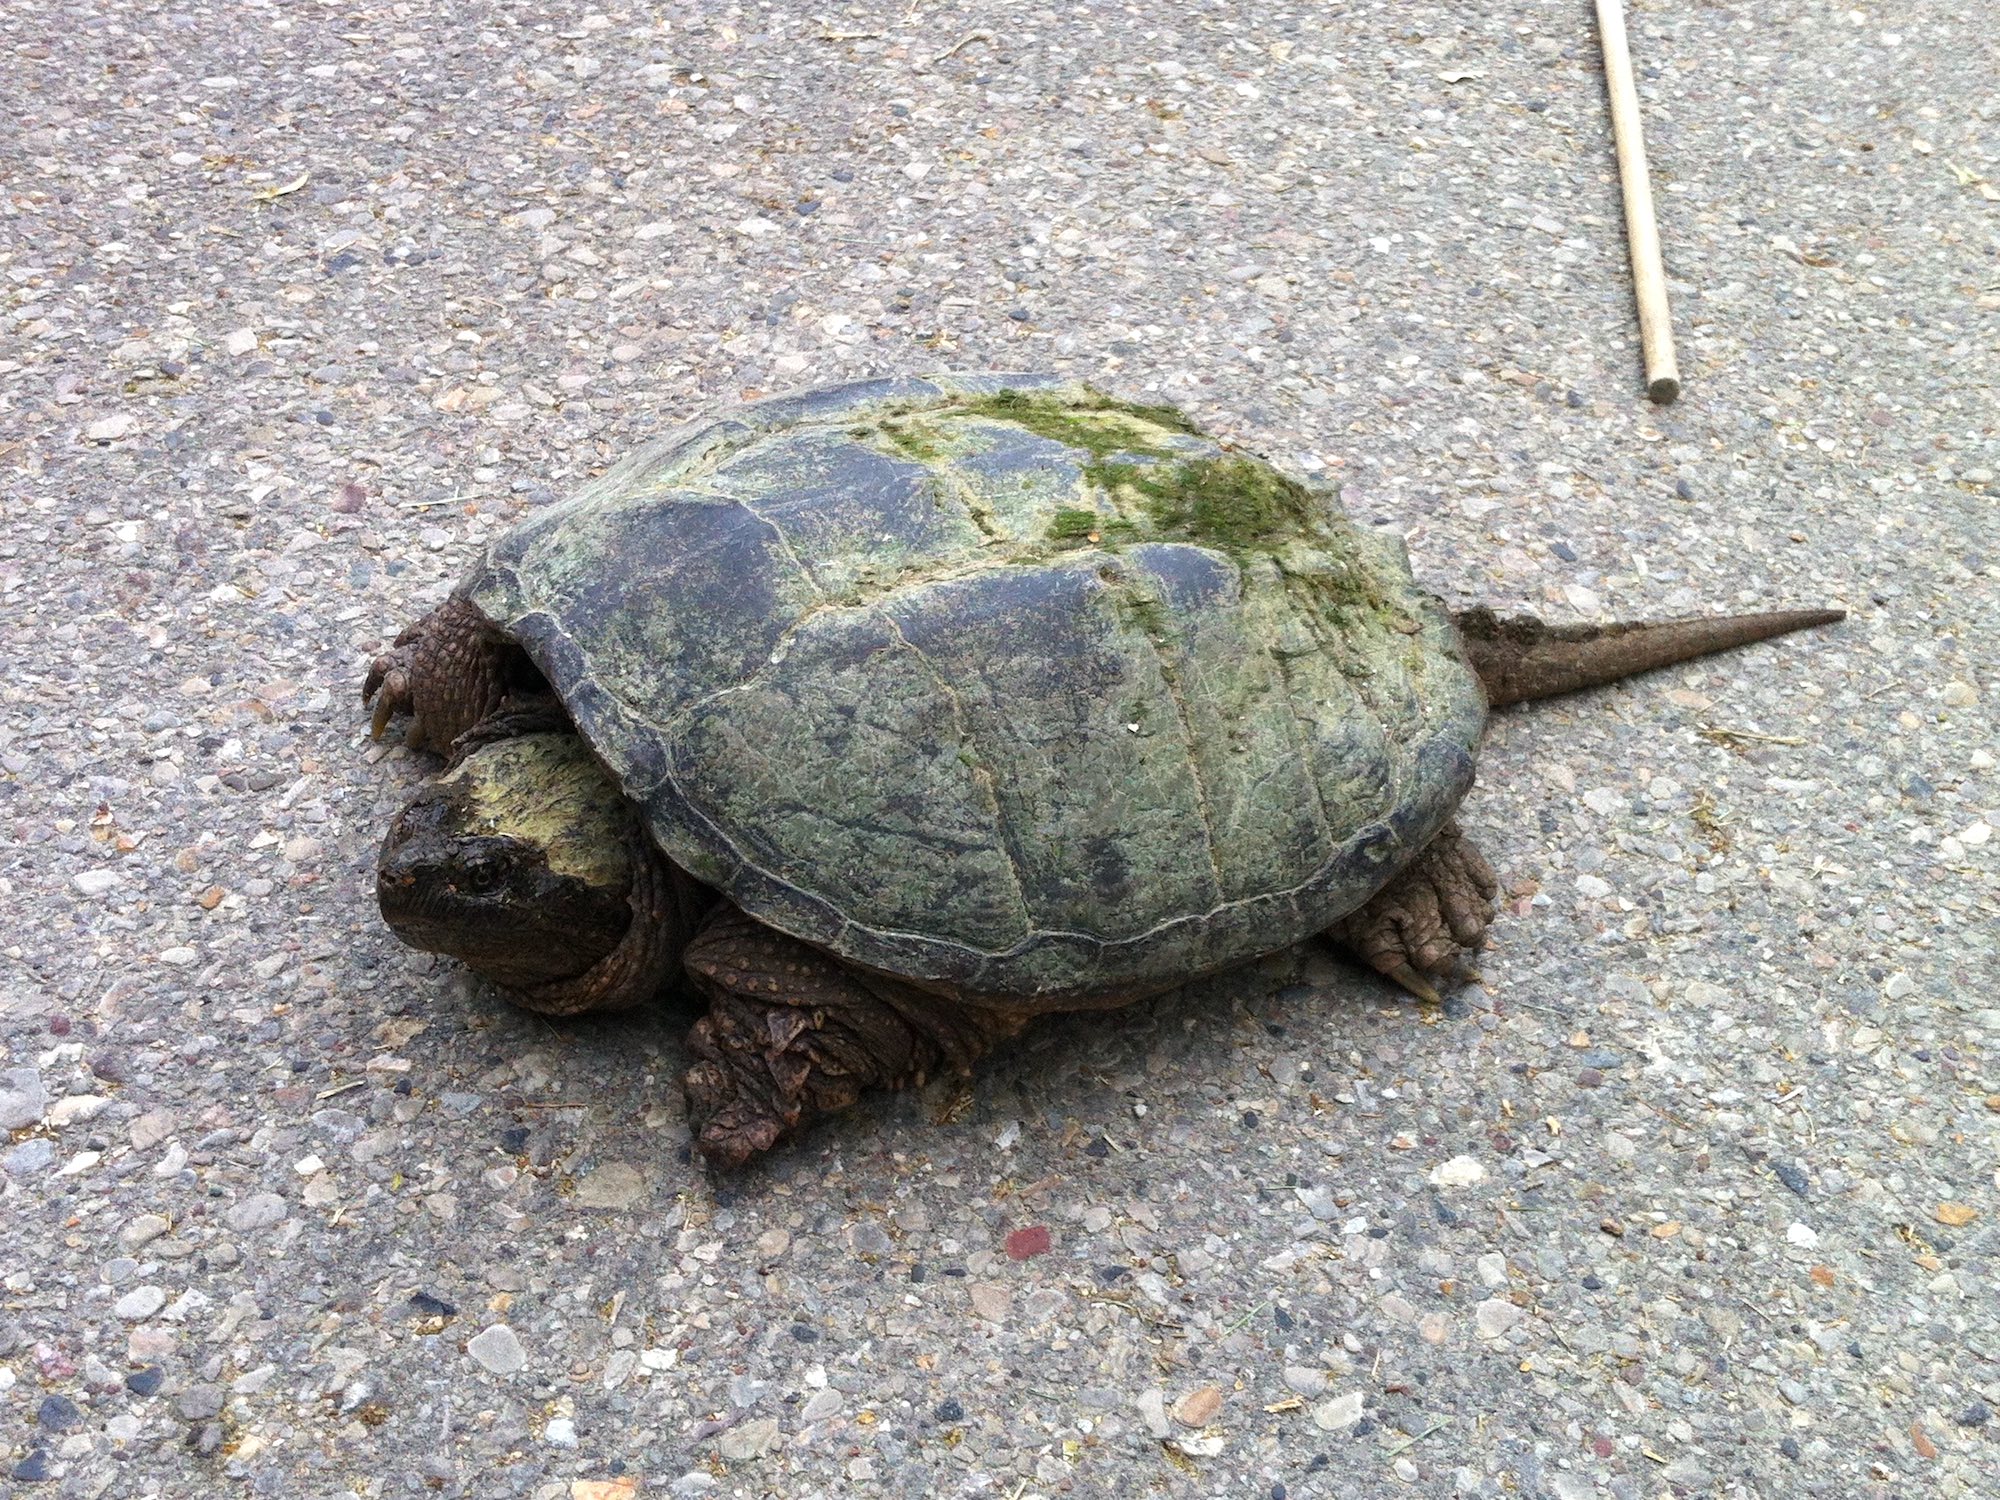 Snapping Turtle walking on Arbor Drive in Madison, Wisconsin on June 5, 2015.